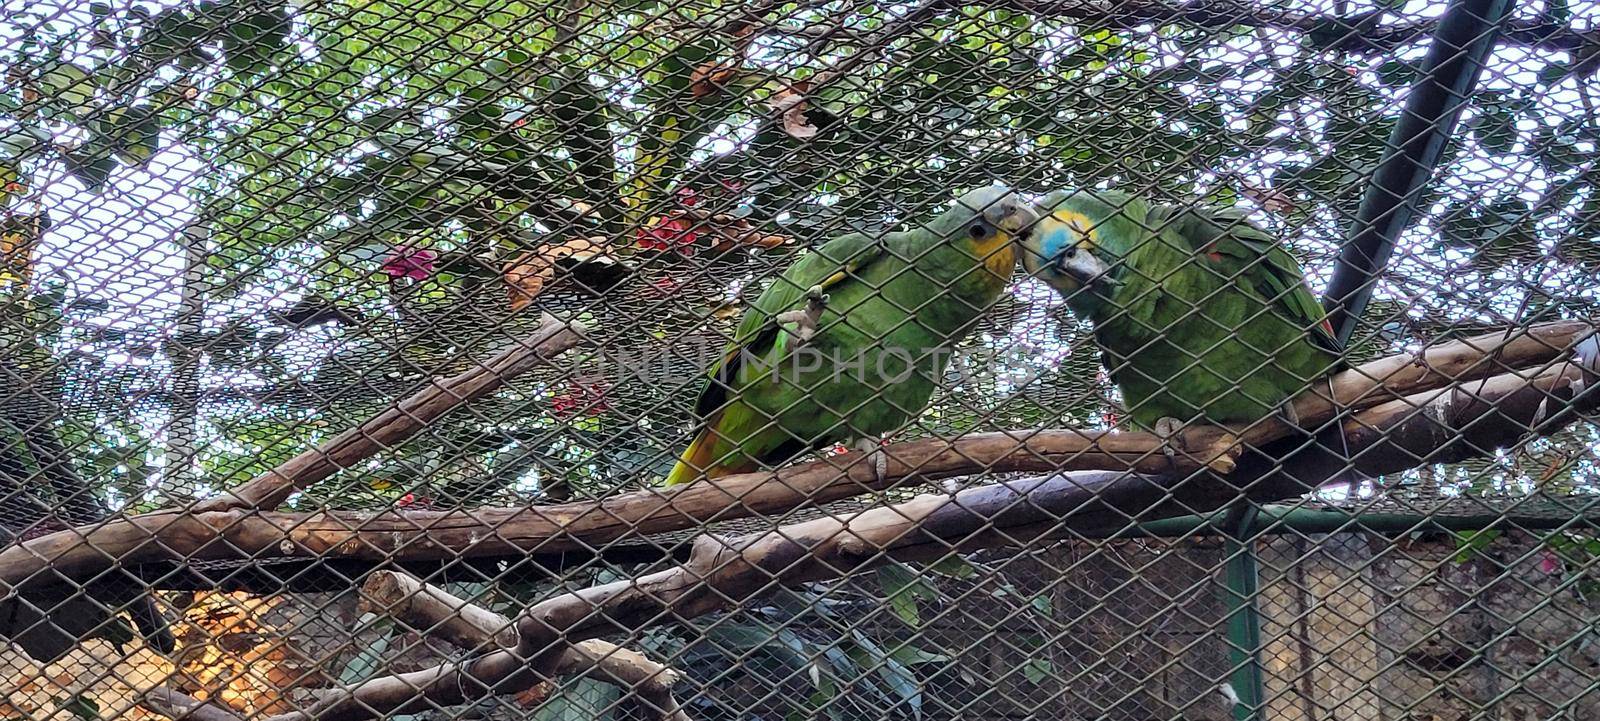 couple of parrots in cage together cuddling, in brazilian zoo